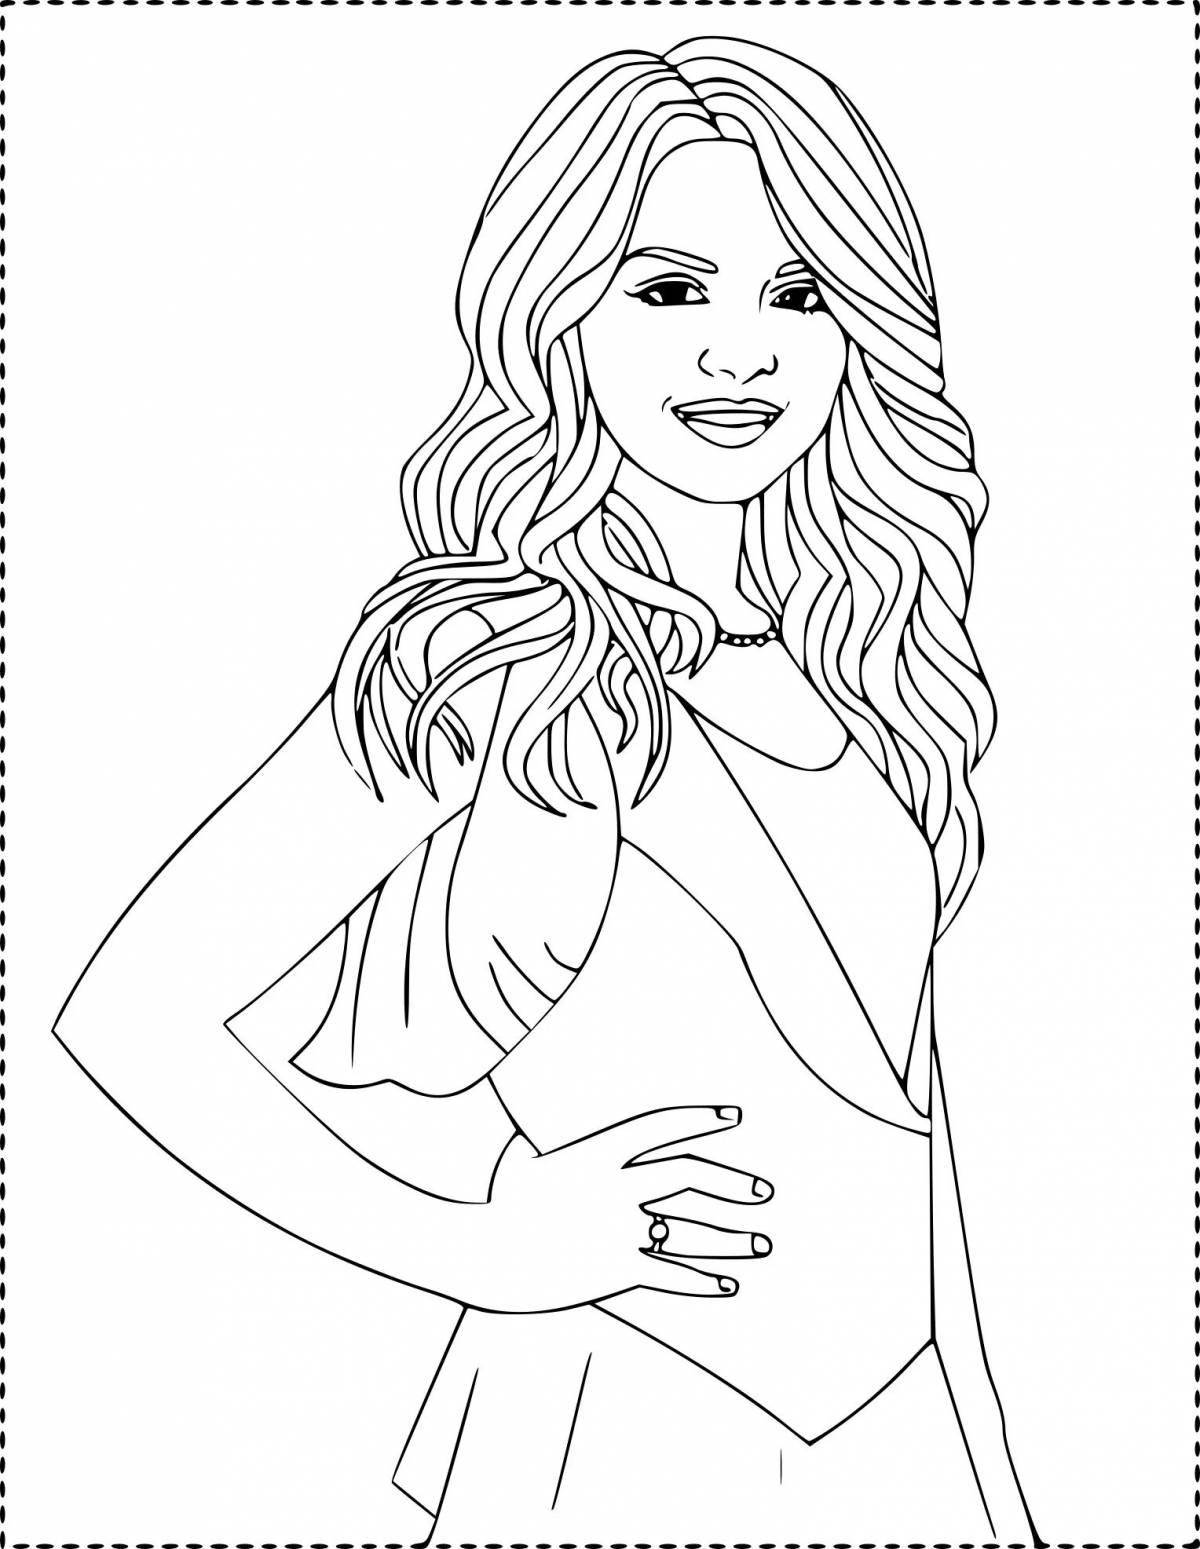 Fun coloring book with your photo